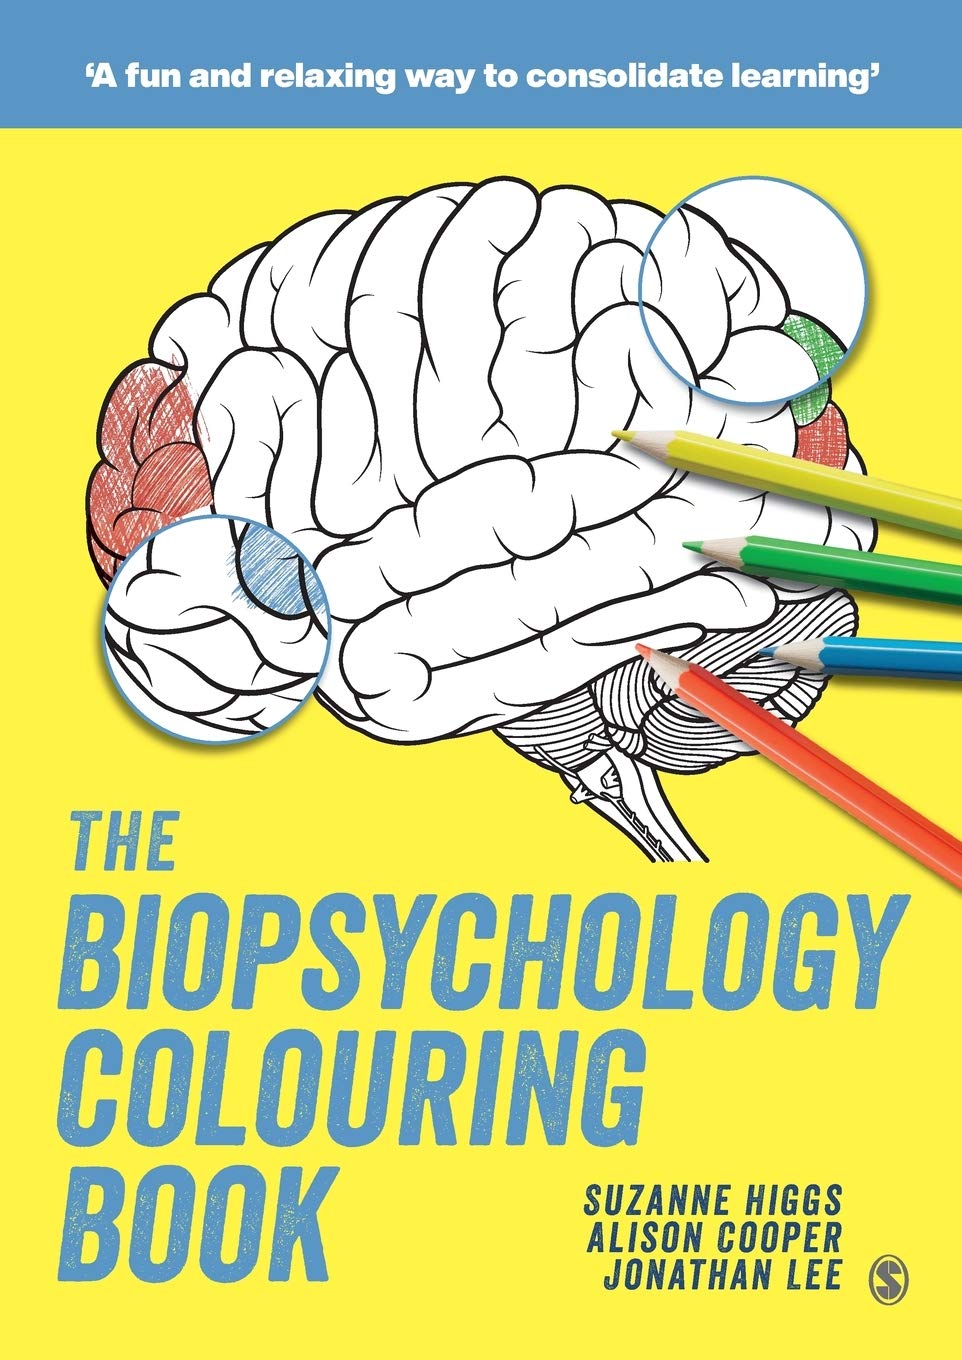 The Biopsychology Colouring Book | Suzanne Higgs, Alison Cooper, Jonathan Lee